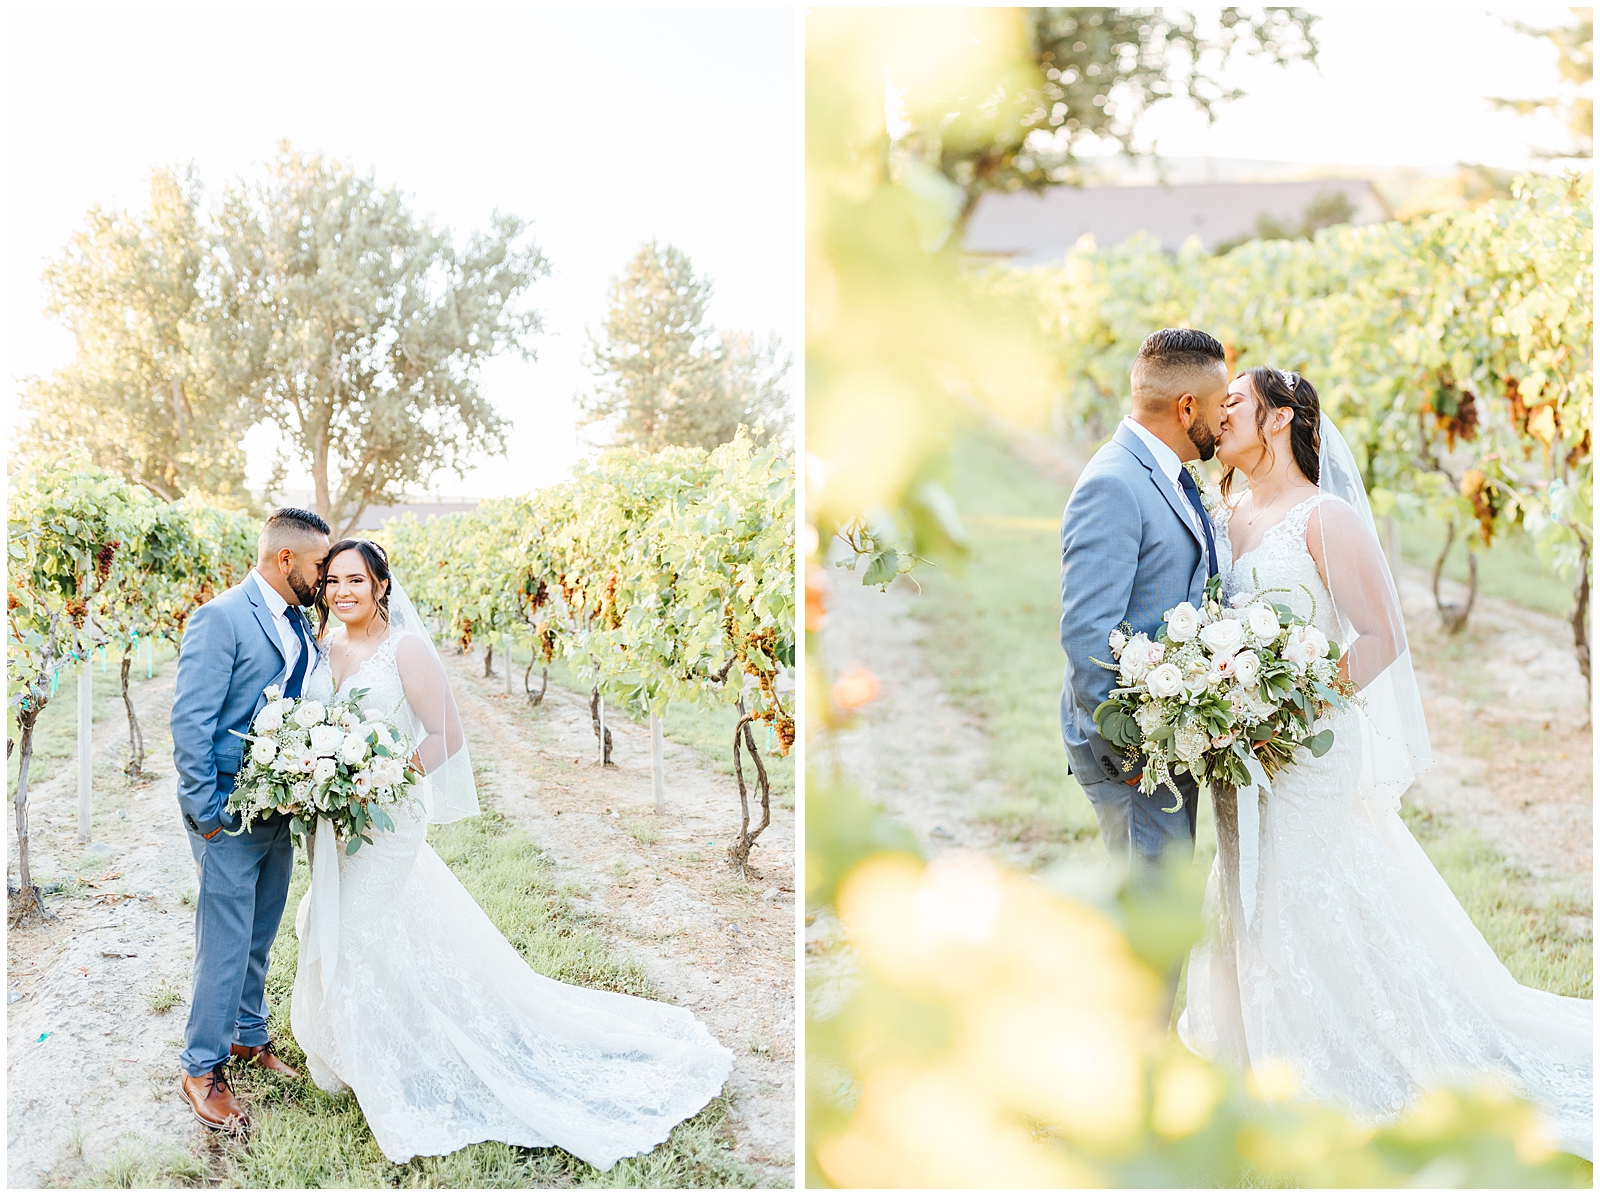 Dusty Blue Fox Canyon Vineyards Wedding Husband and Wife Golden Hour Portraits